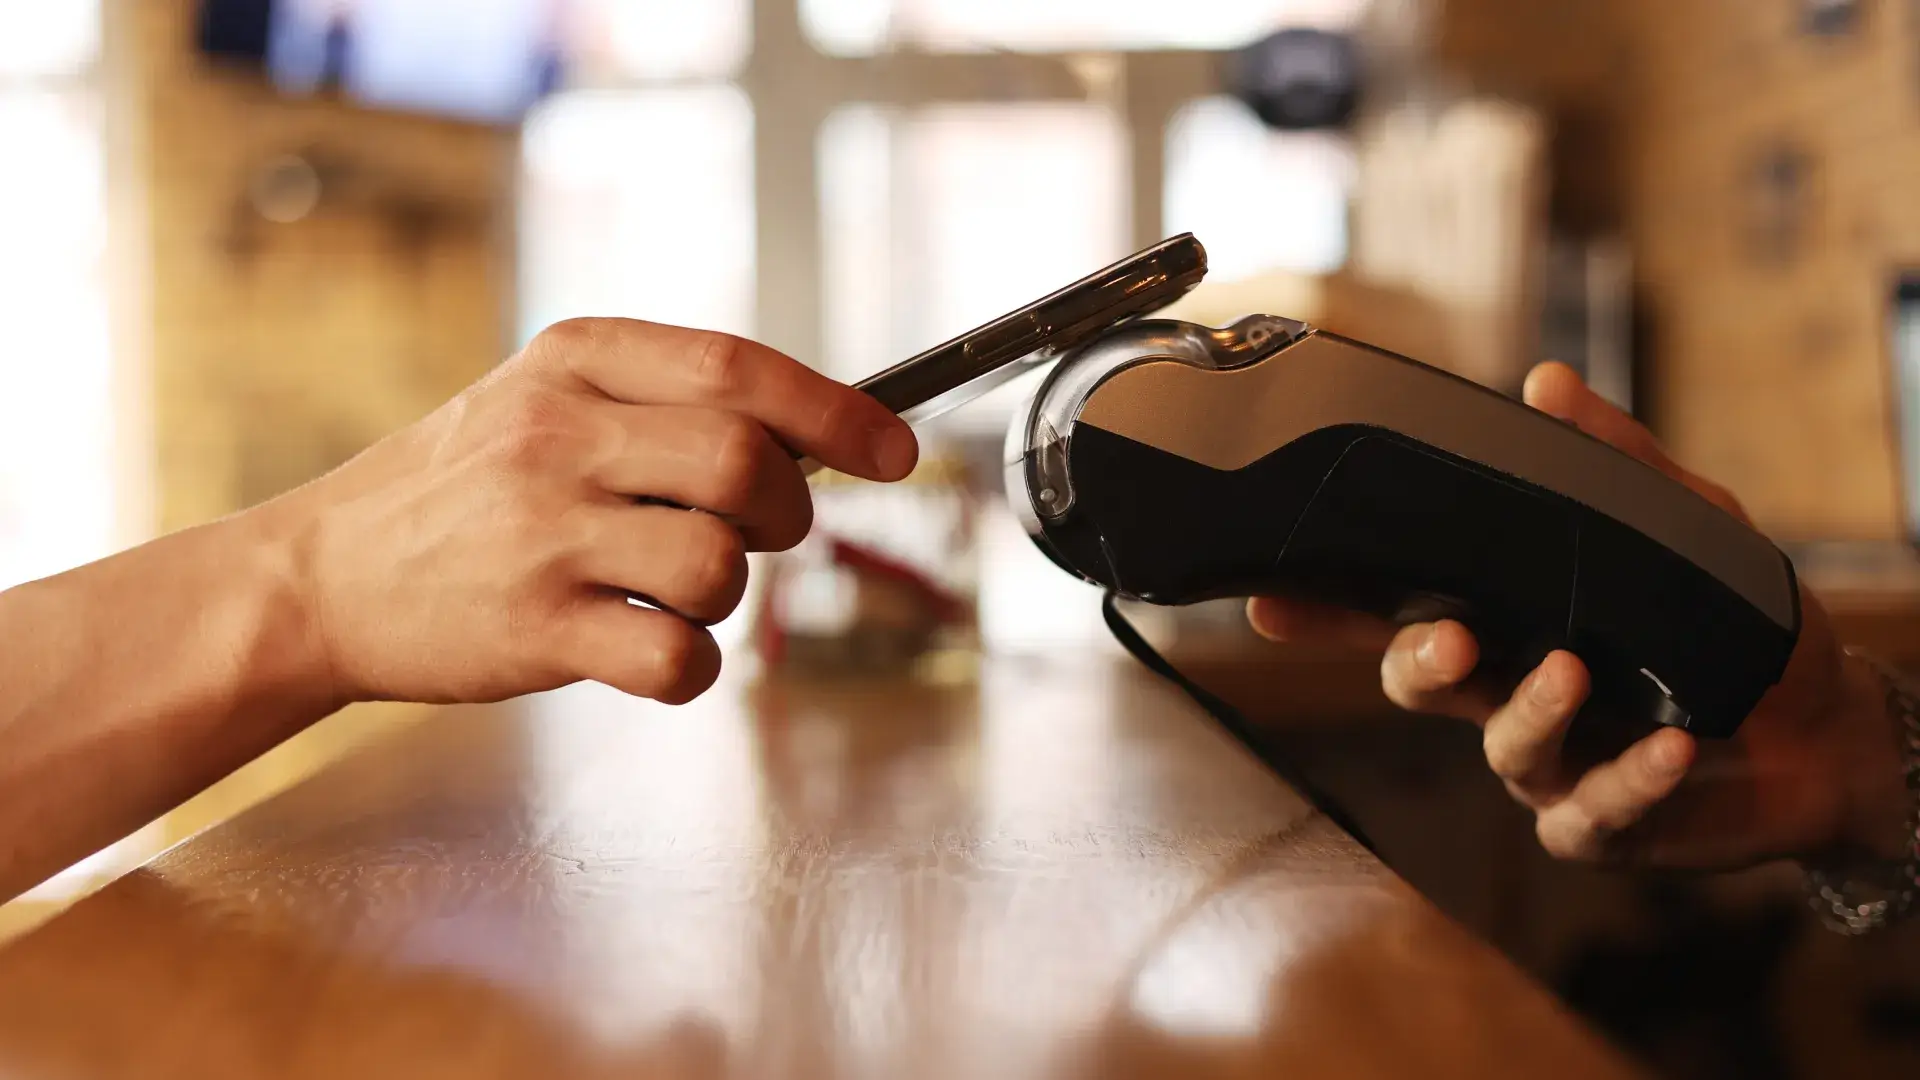 A customer puts their smartphone on a handheld device for contactless payment and for getting an automated e-receipt